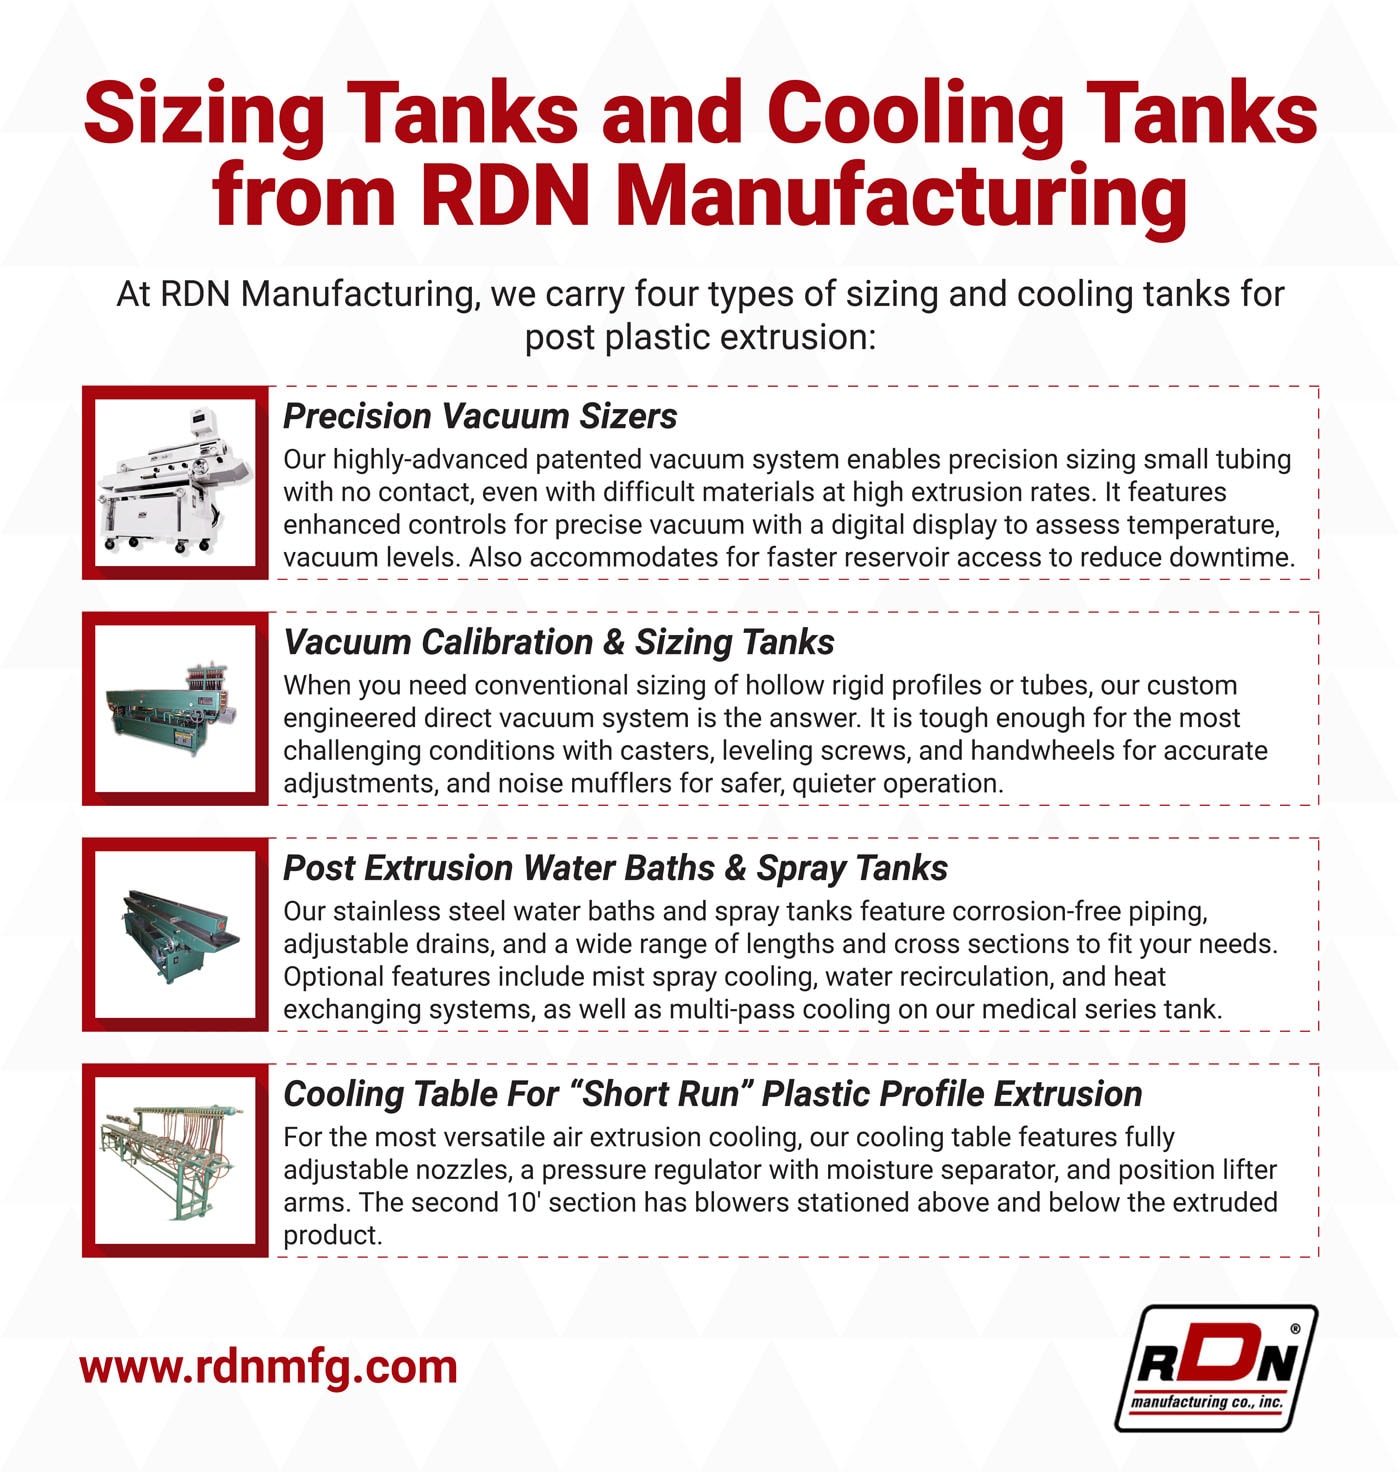 Sizing Tanks and Cooling Tanks from RDN Manufacturing